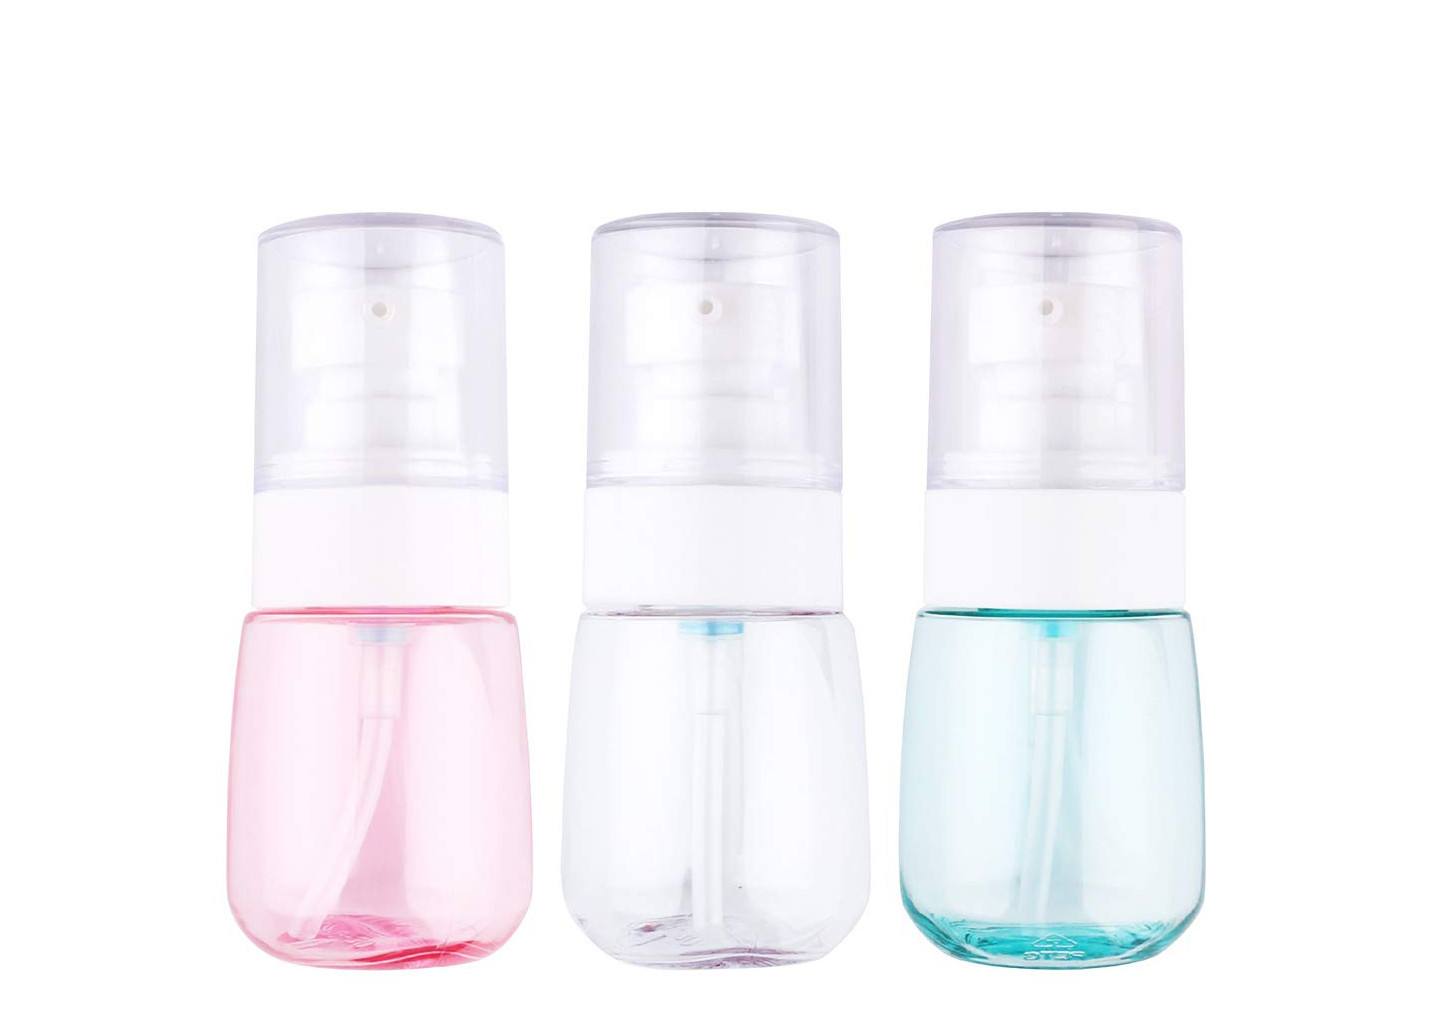 Non Spill Round Cosmetic Pump Bottles Comfortable Hand Feeling